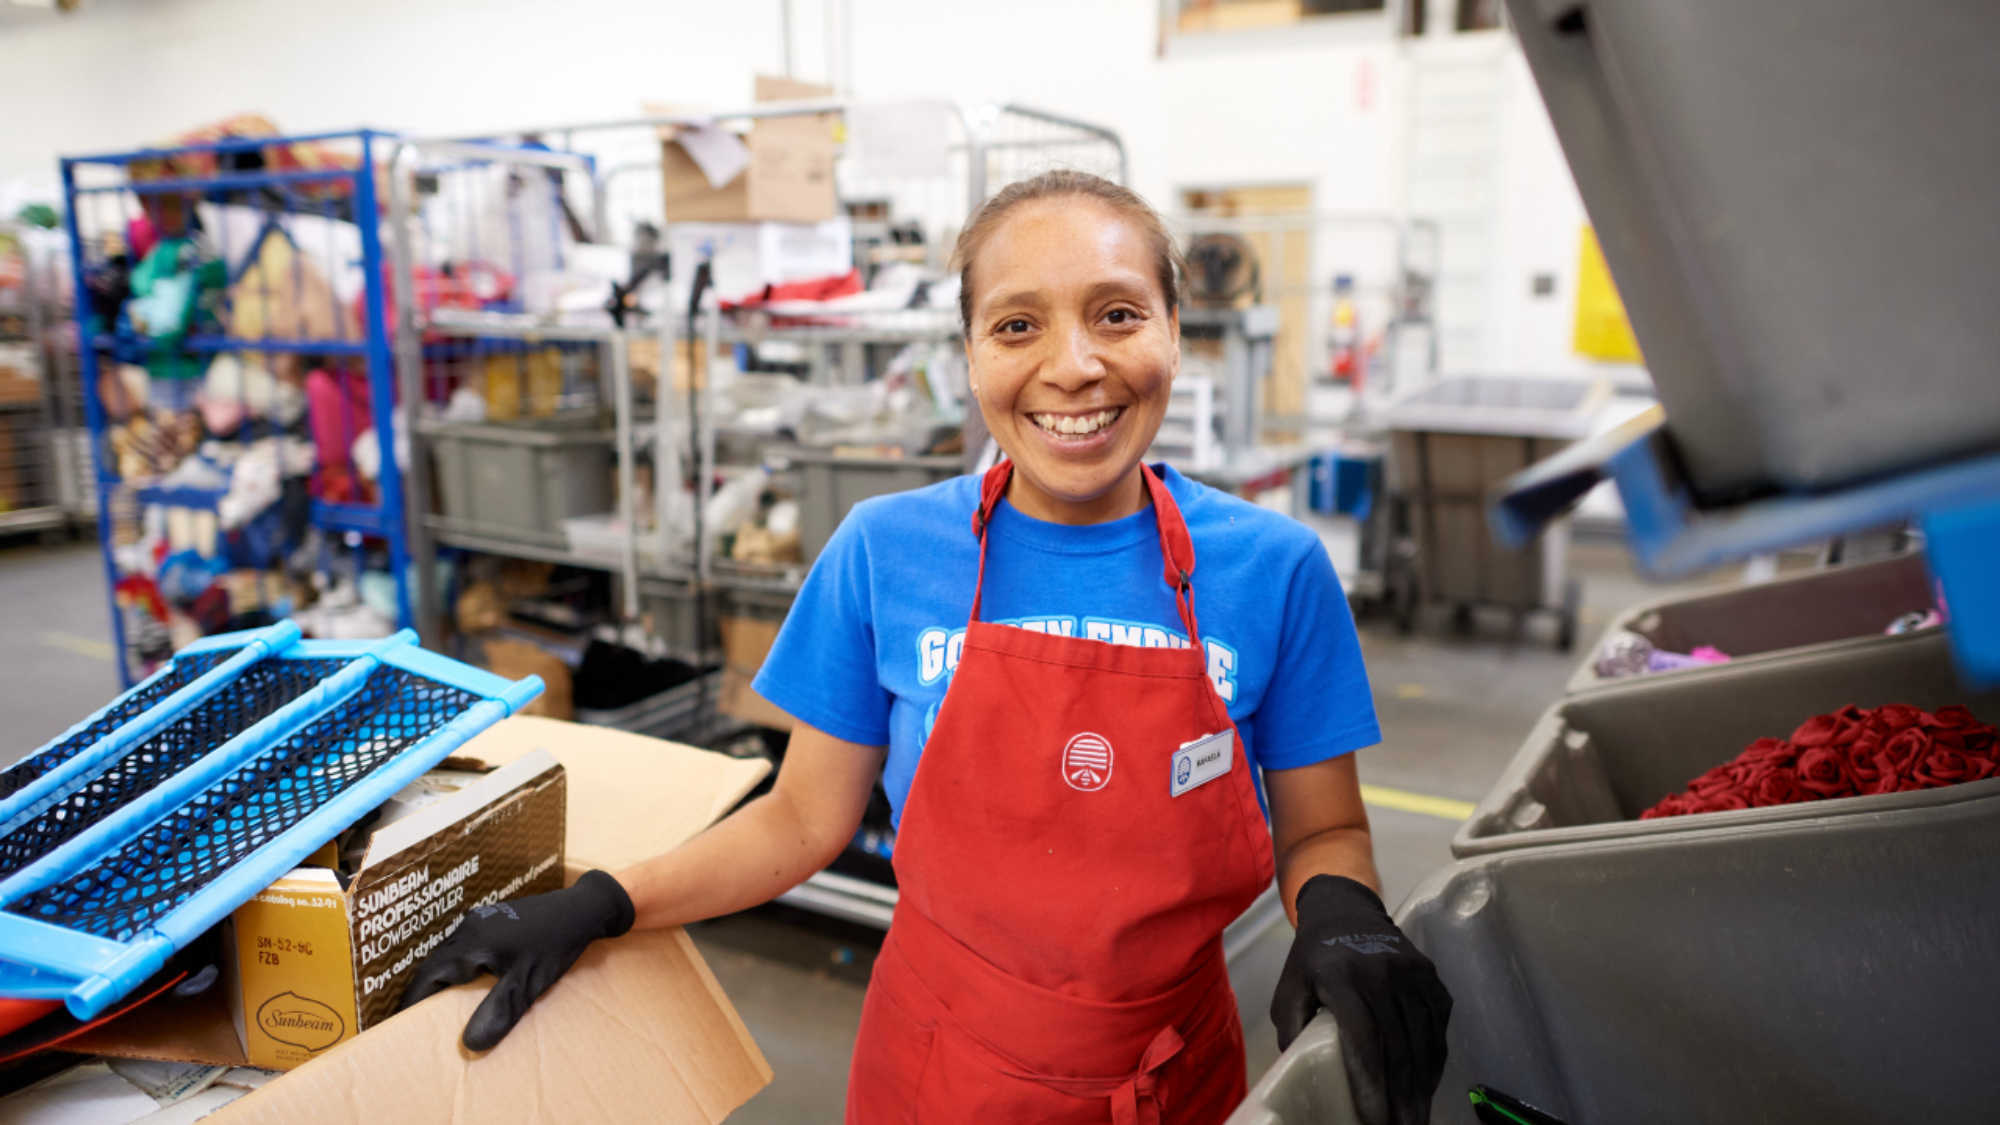 A Deseret Industries employee smiles as she sorts donations into bins for pricing in the back room